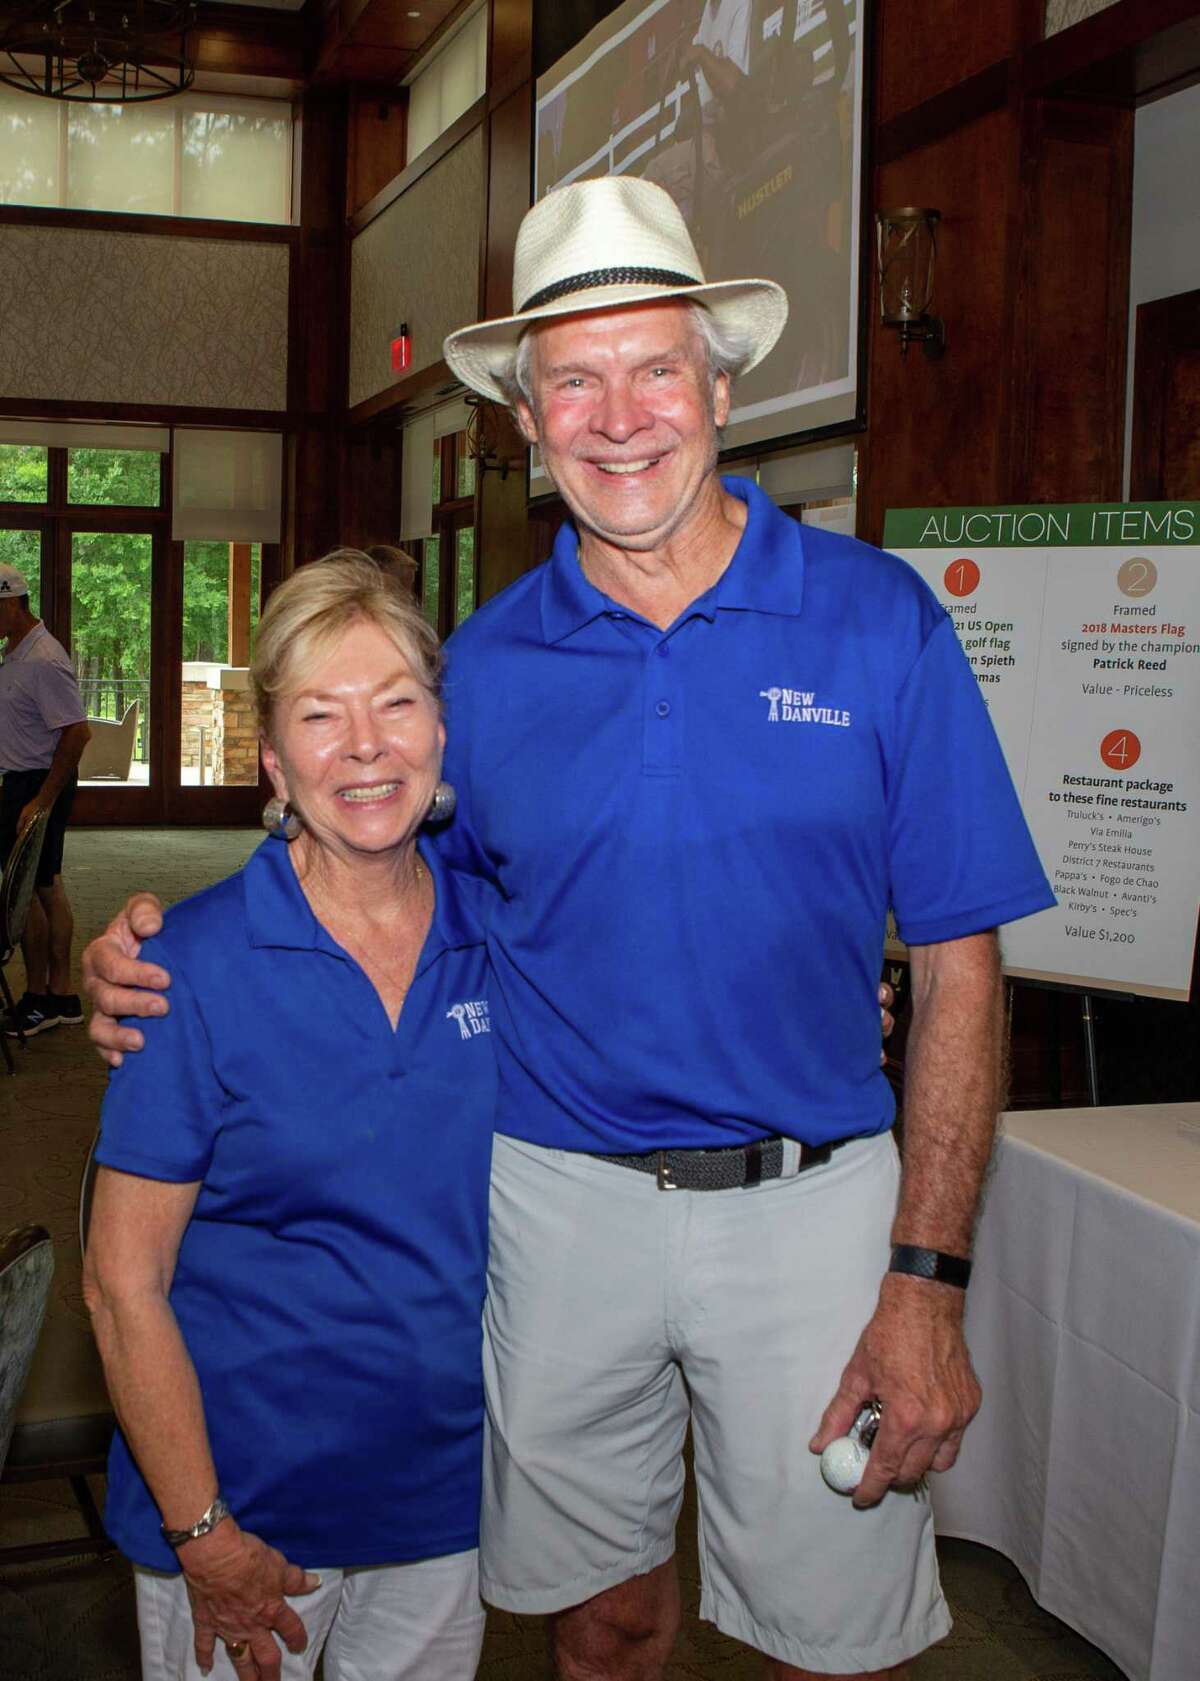 Odette D'Agostino and her co-chair, Brady Hull, worked together on New Danville's first golf tournament called Play a Round for the Wranglers this year. The Willis-based nonprofit that serves adults with intellectual and developmental disabilities recently received a donation from the Houston Texans.